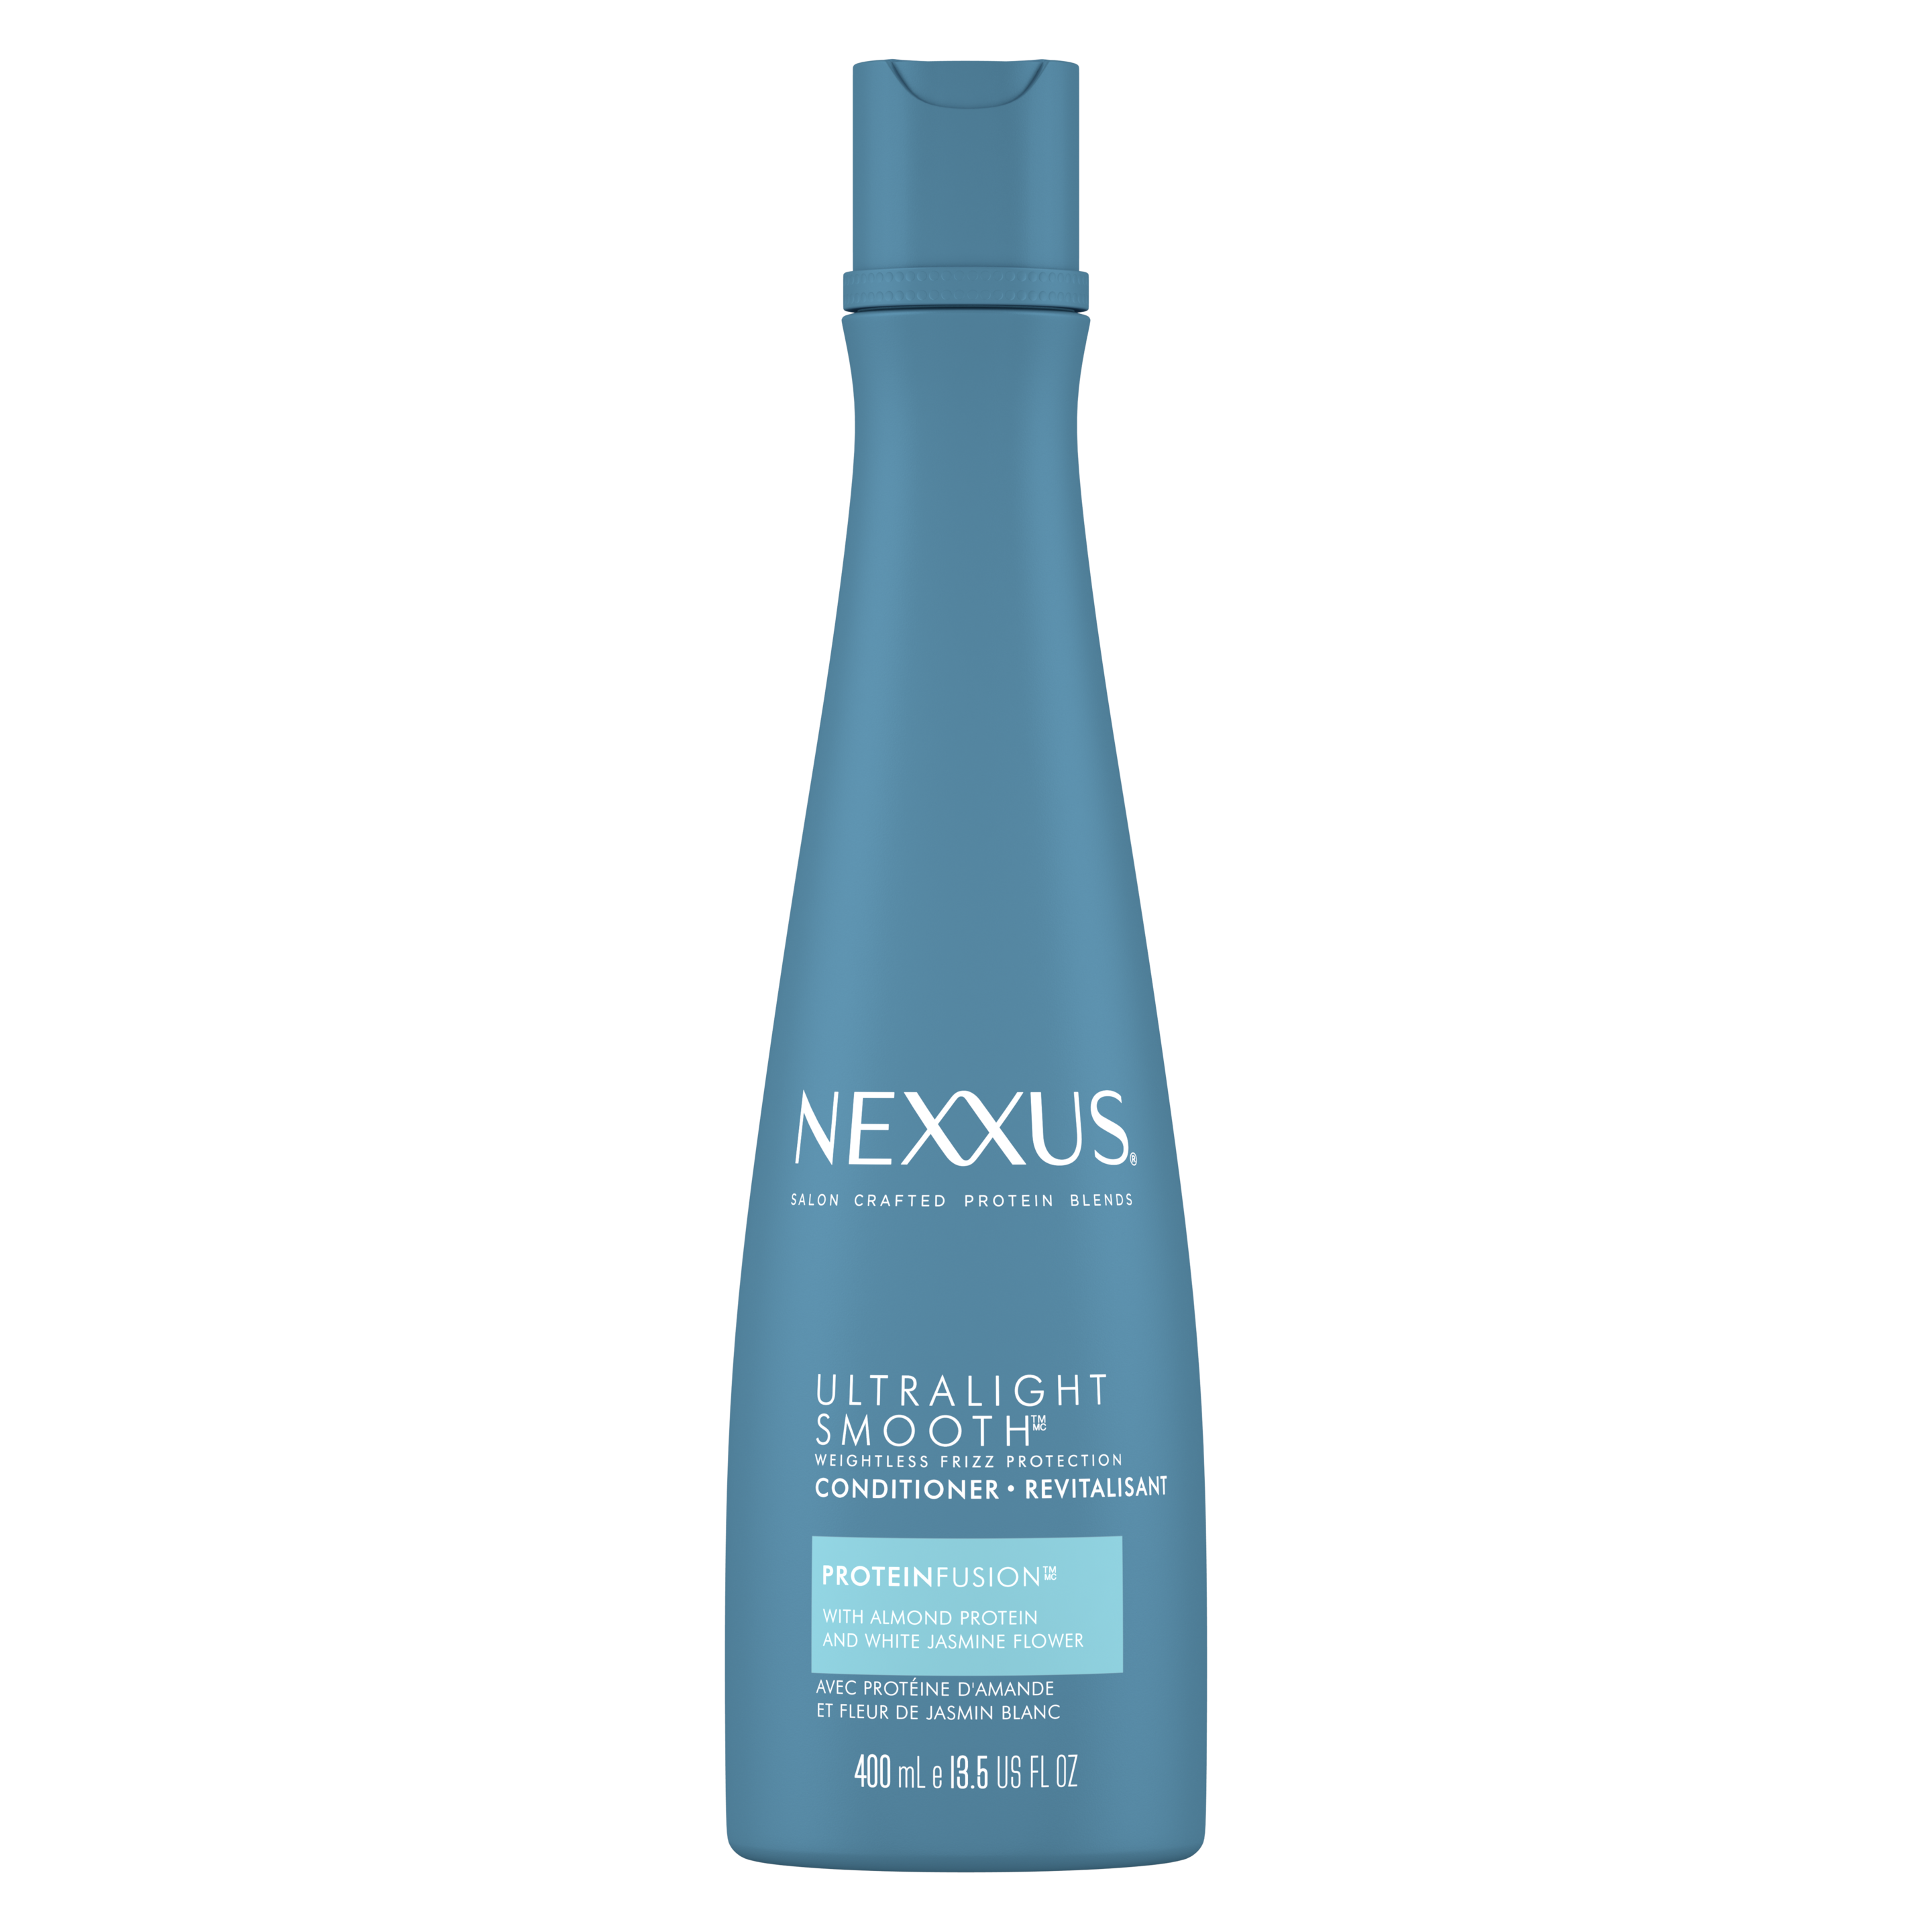 NEXXUS ULTRALIGHT SMOOTH CONDITIONER FOR WEIGHTLESS FRIZZ CONTROL Text